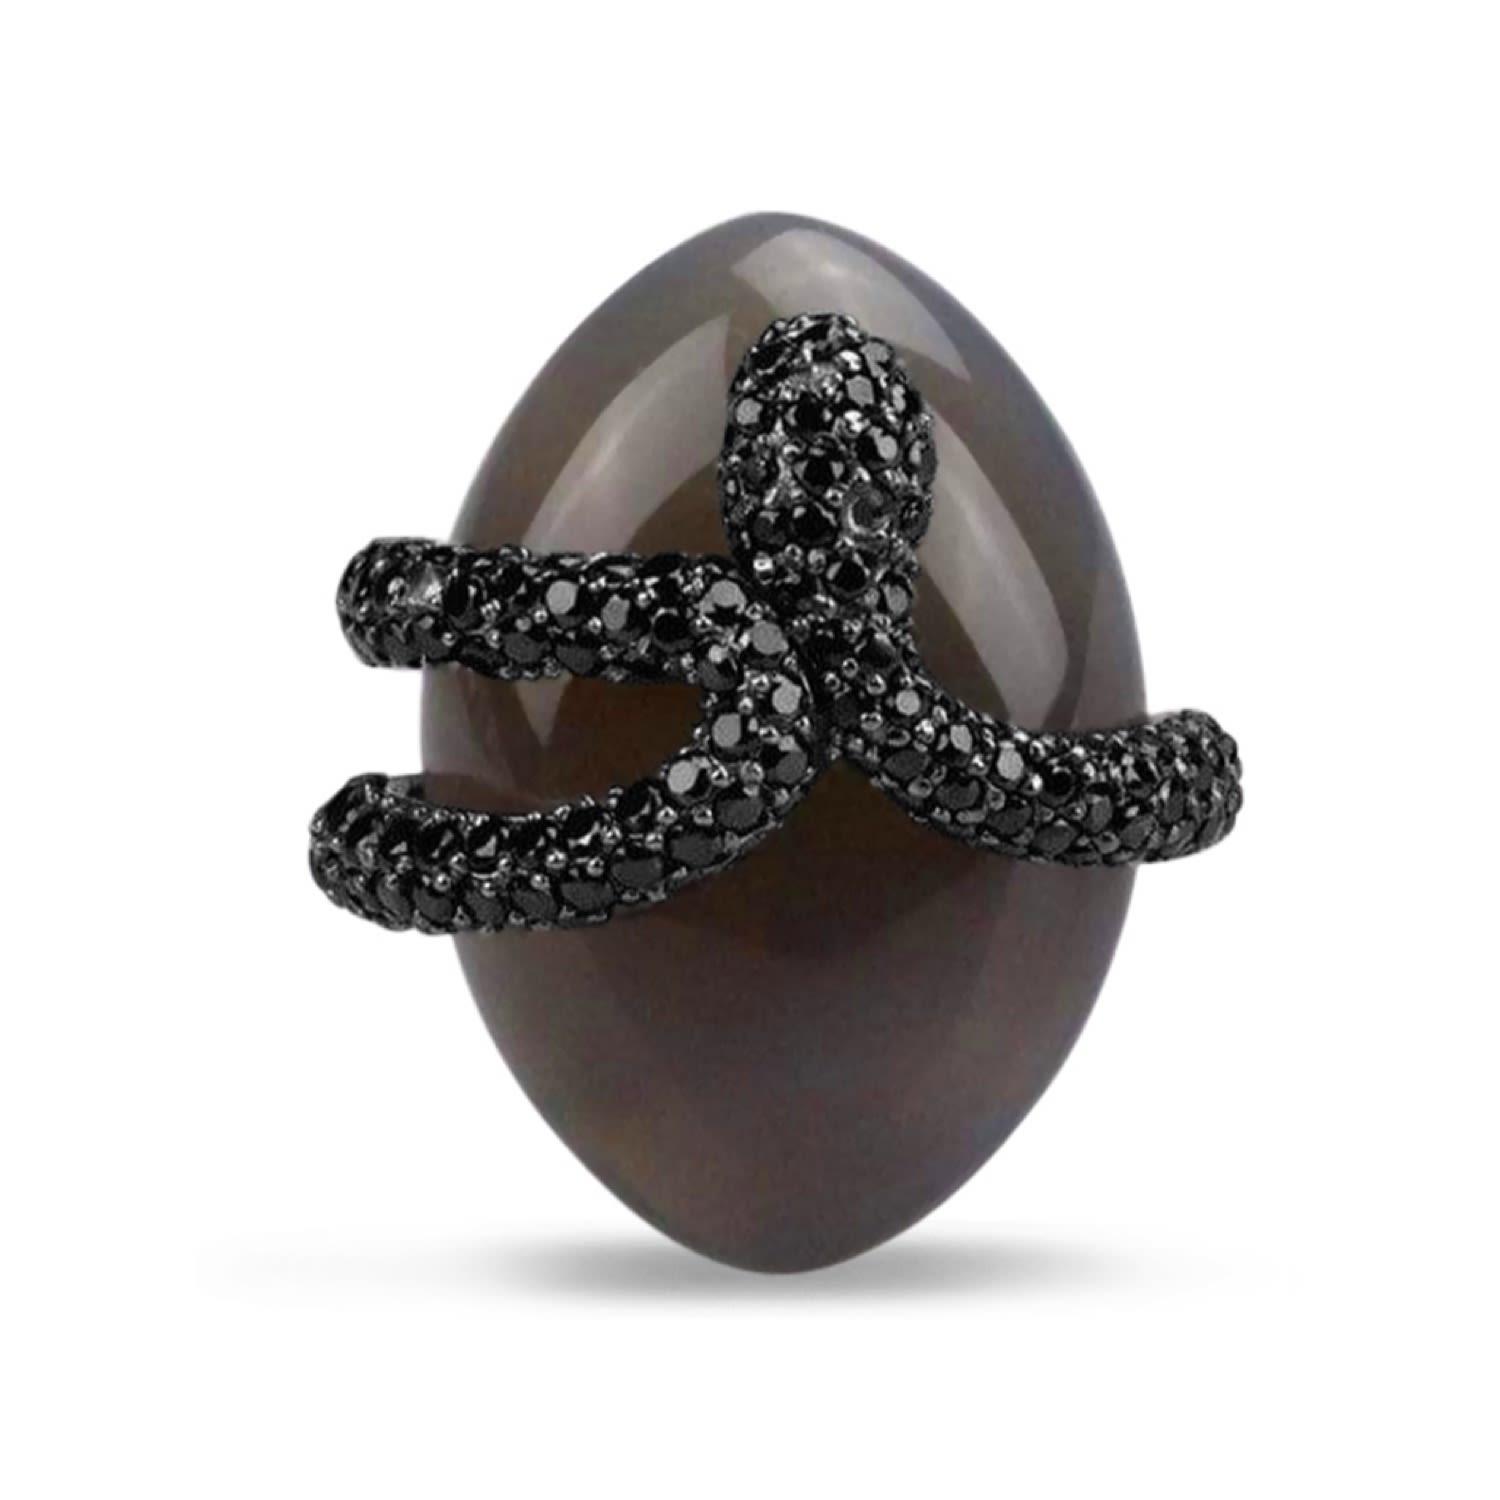 Bellus Domina Agate Umbra Sea Snake Cocktail Ring in Grey (Gray) - Lyst